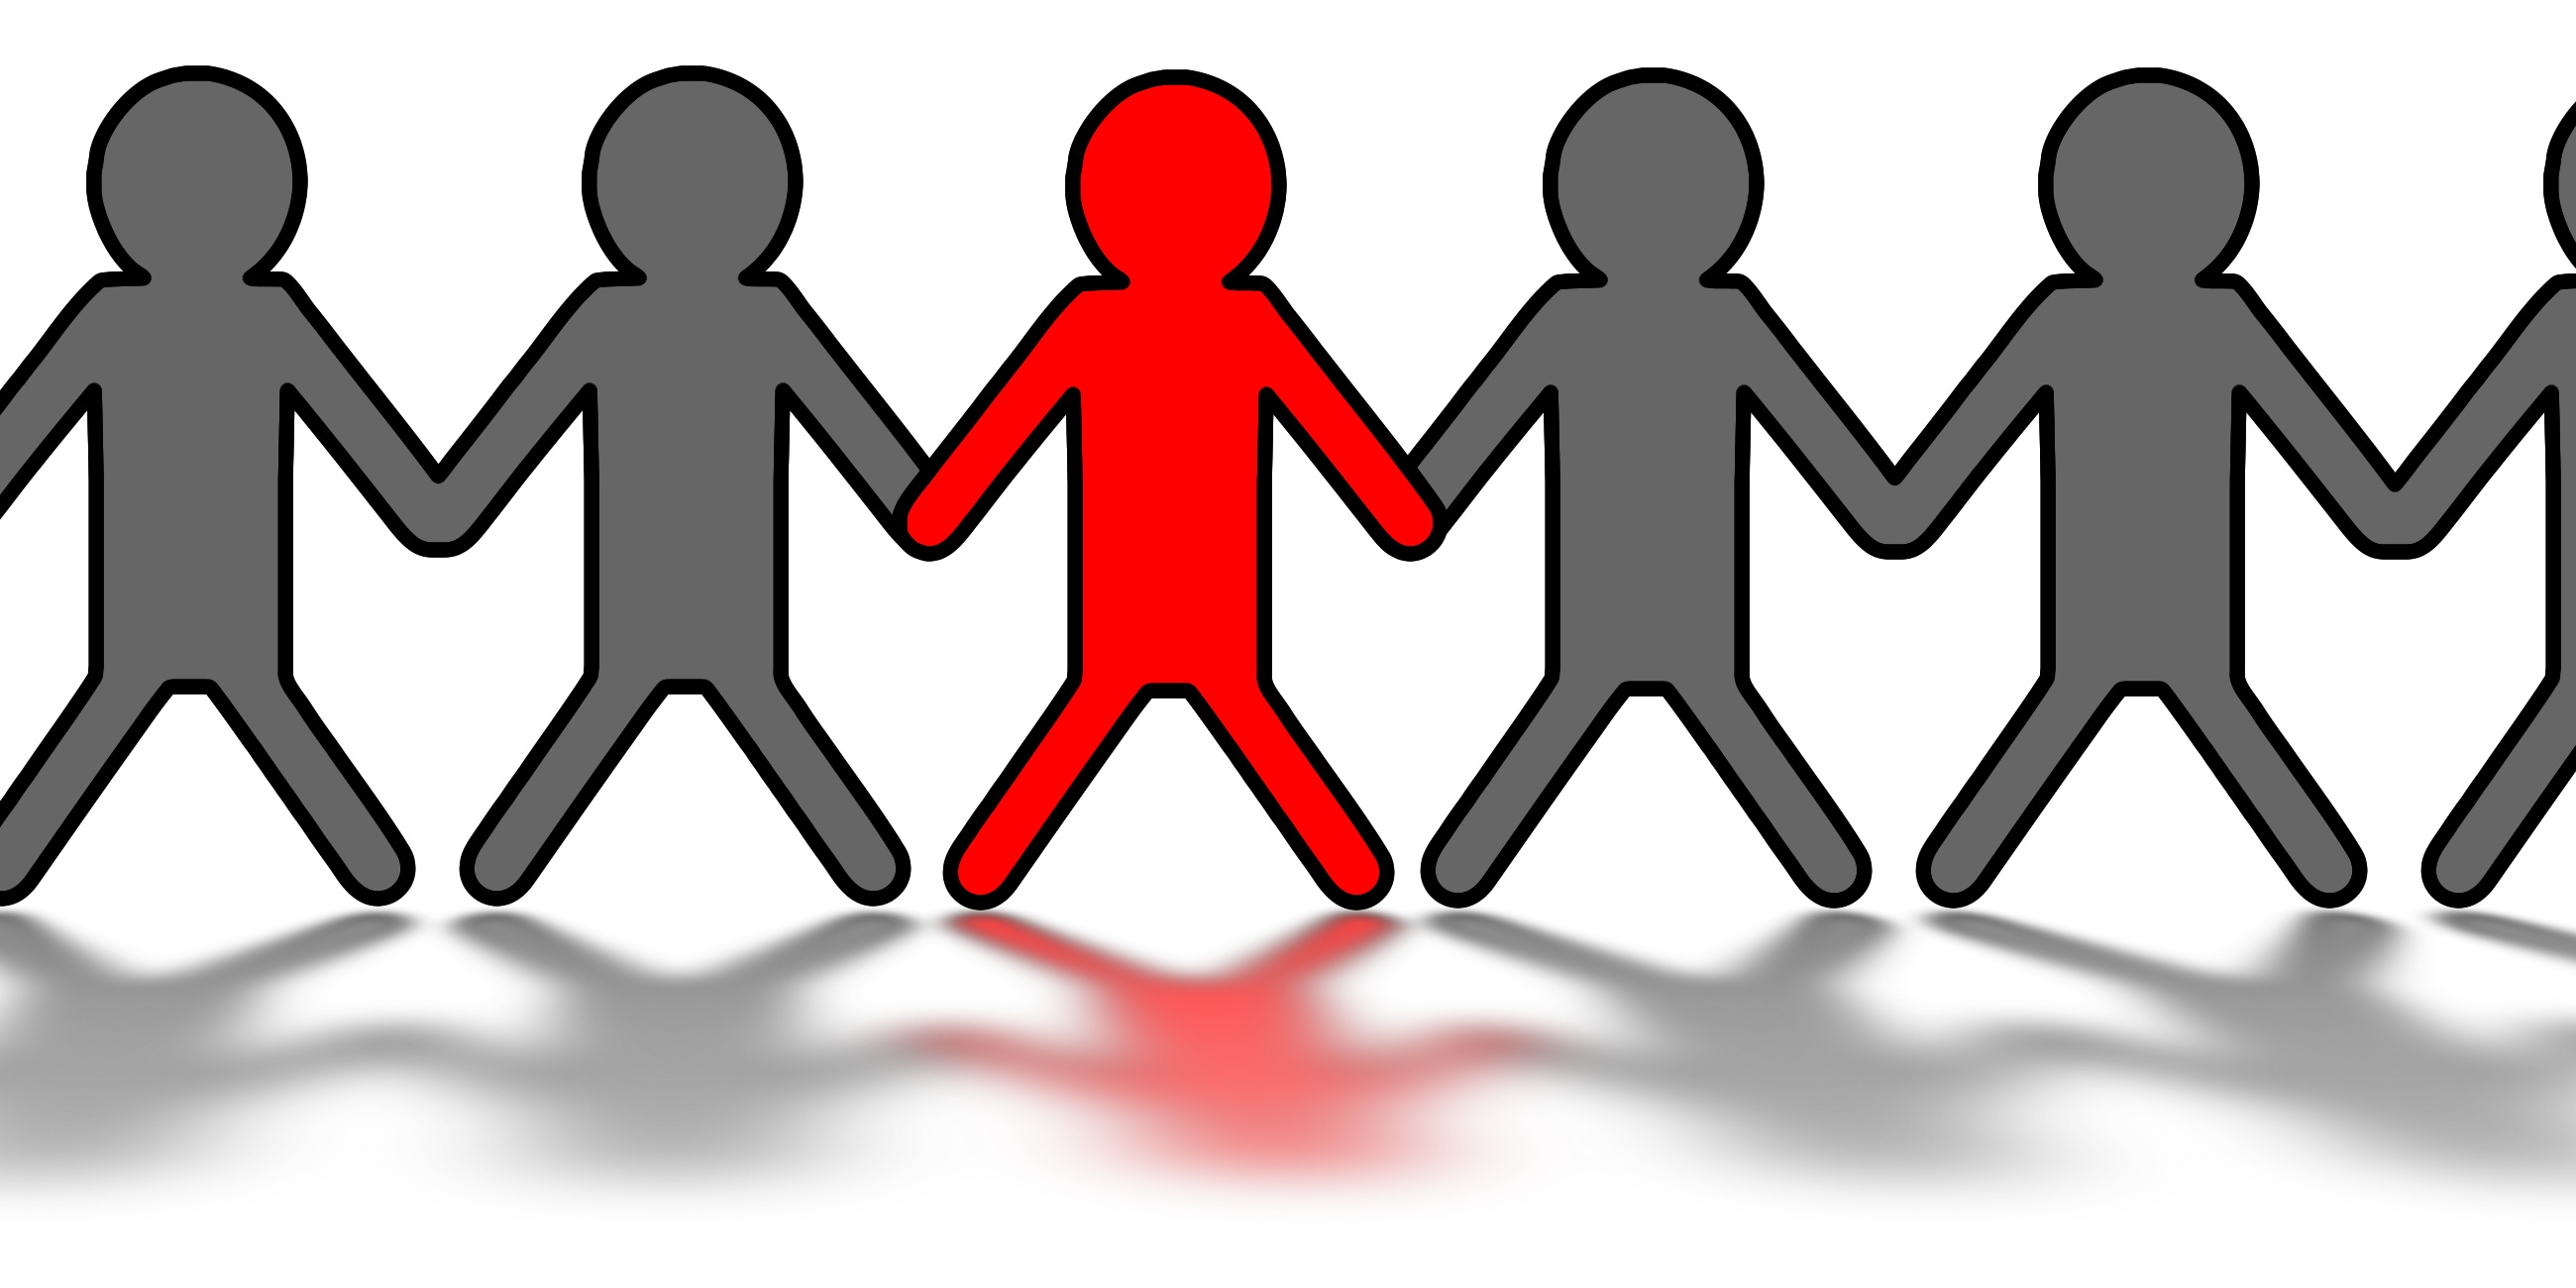 Stick People Holding Hands Clipart Clipart Best | Images and Photos finder